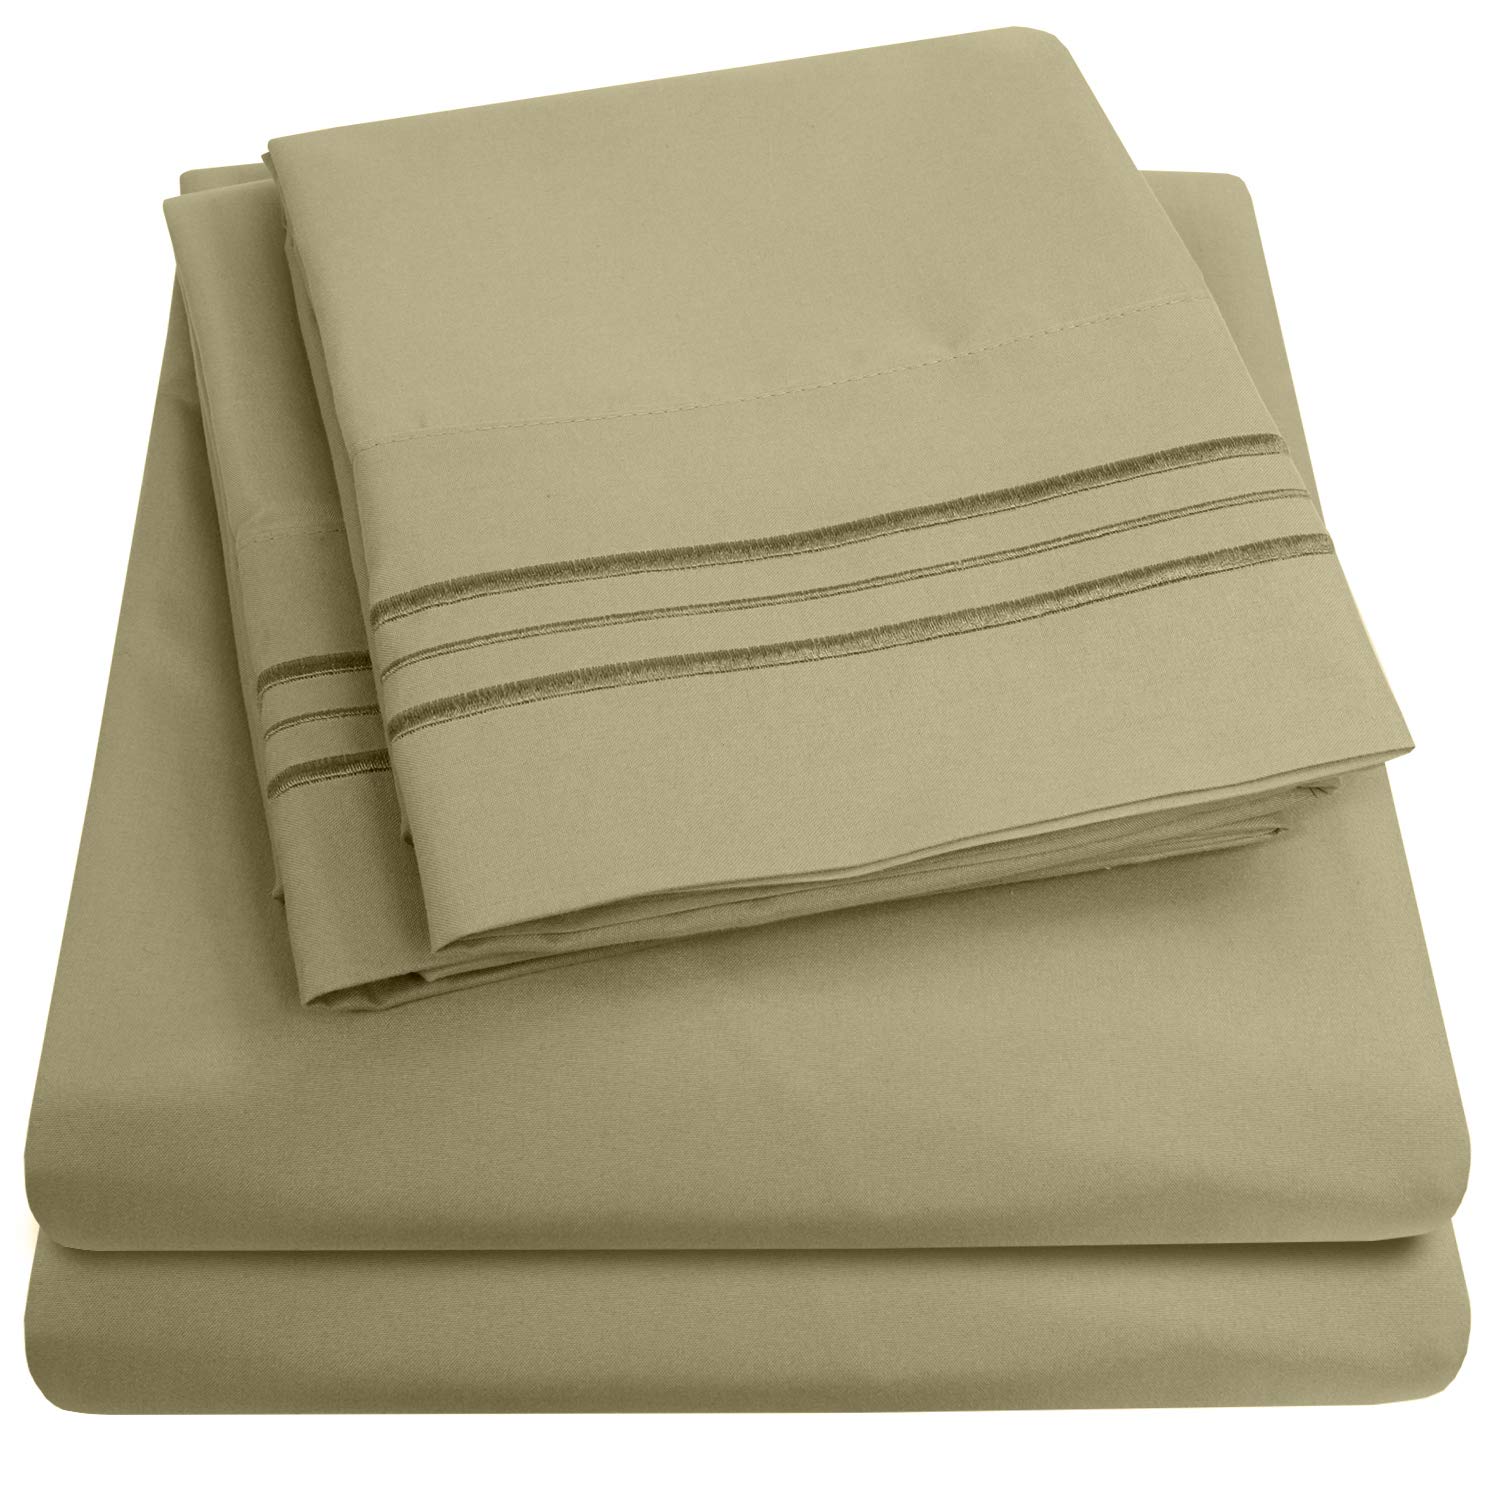 Book Cover 1500 Supreme Collection Extra Soft Split King Sheets Set, Sage - Luxury Bed Sheets Set with Deep Pocket Wrinkle Free Bedding, Over 40 Colors, Split King Size, Sage Split King Size Sage